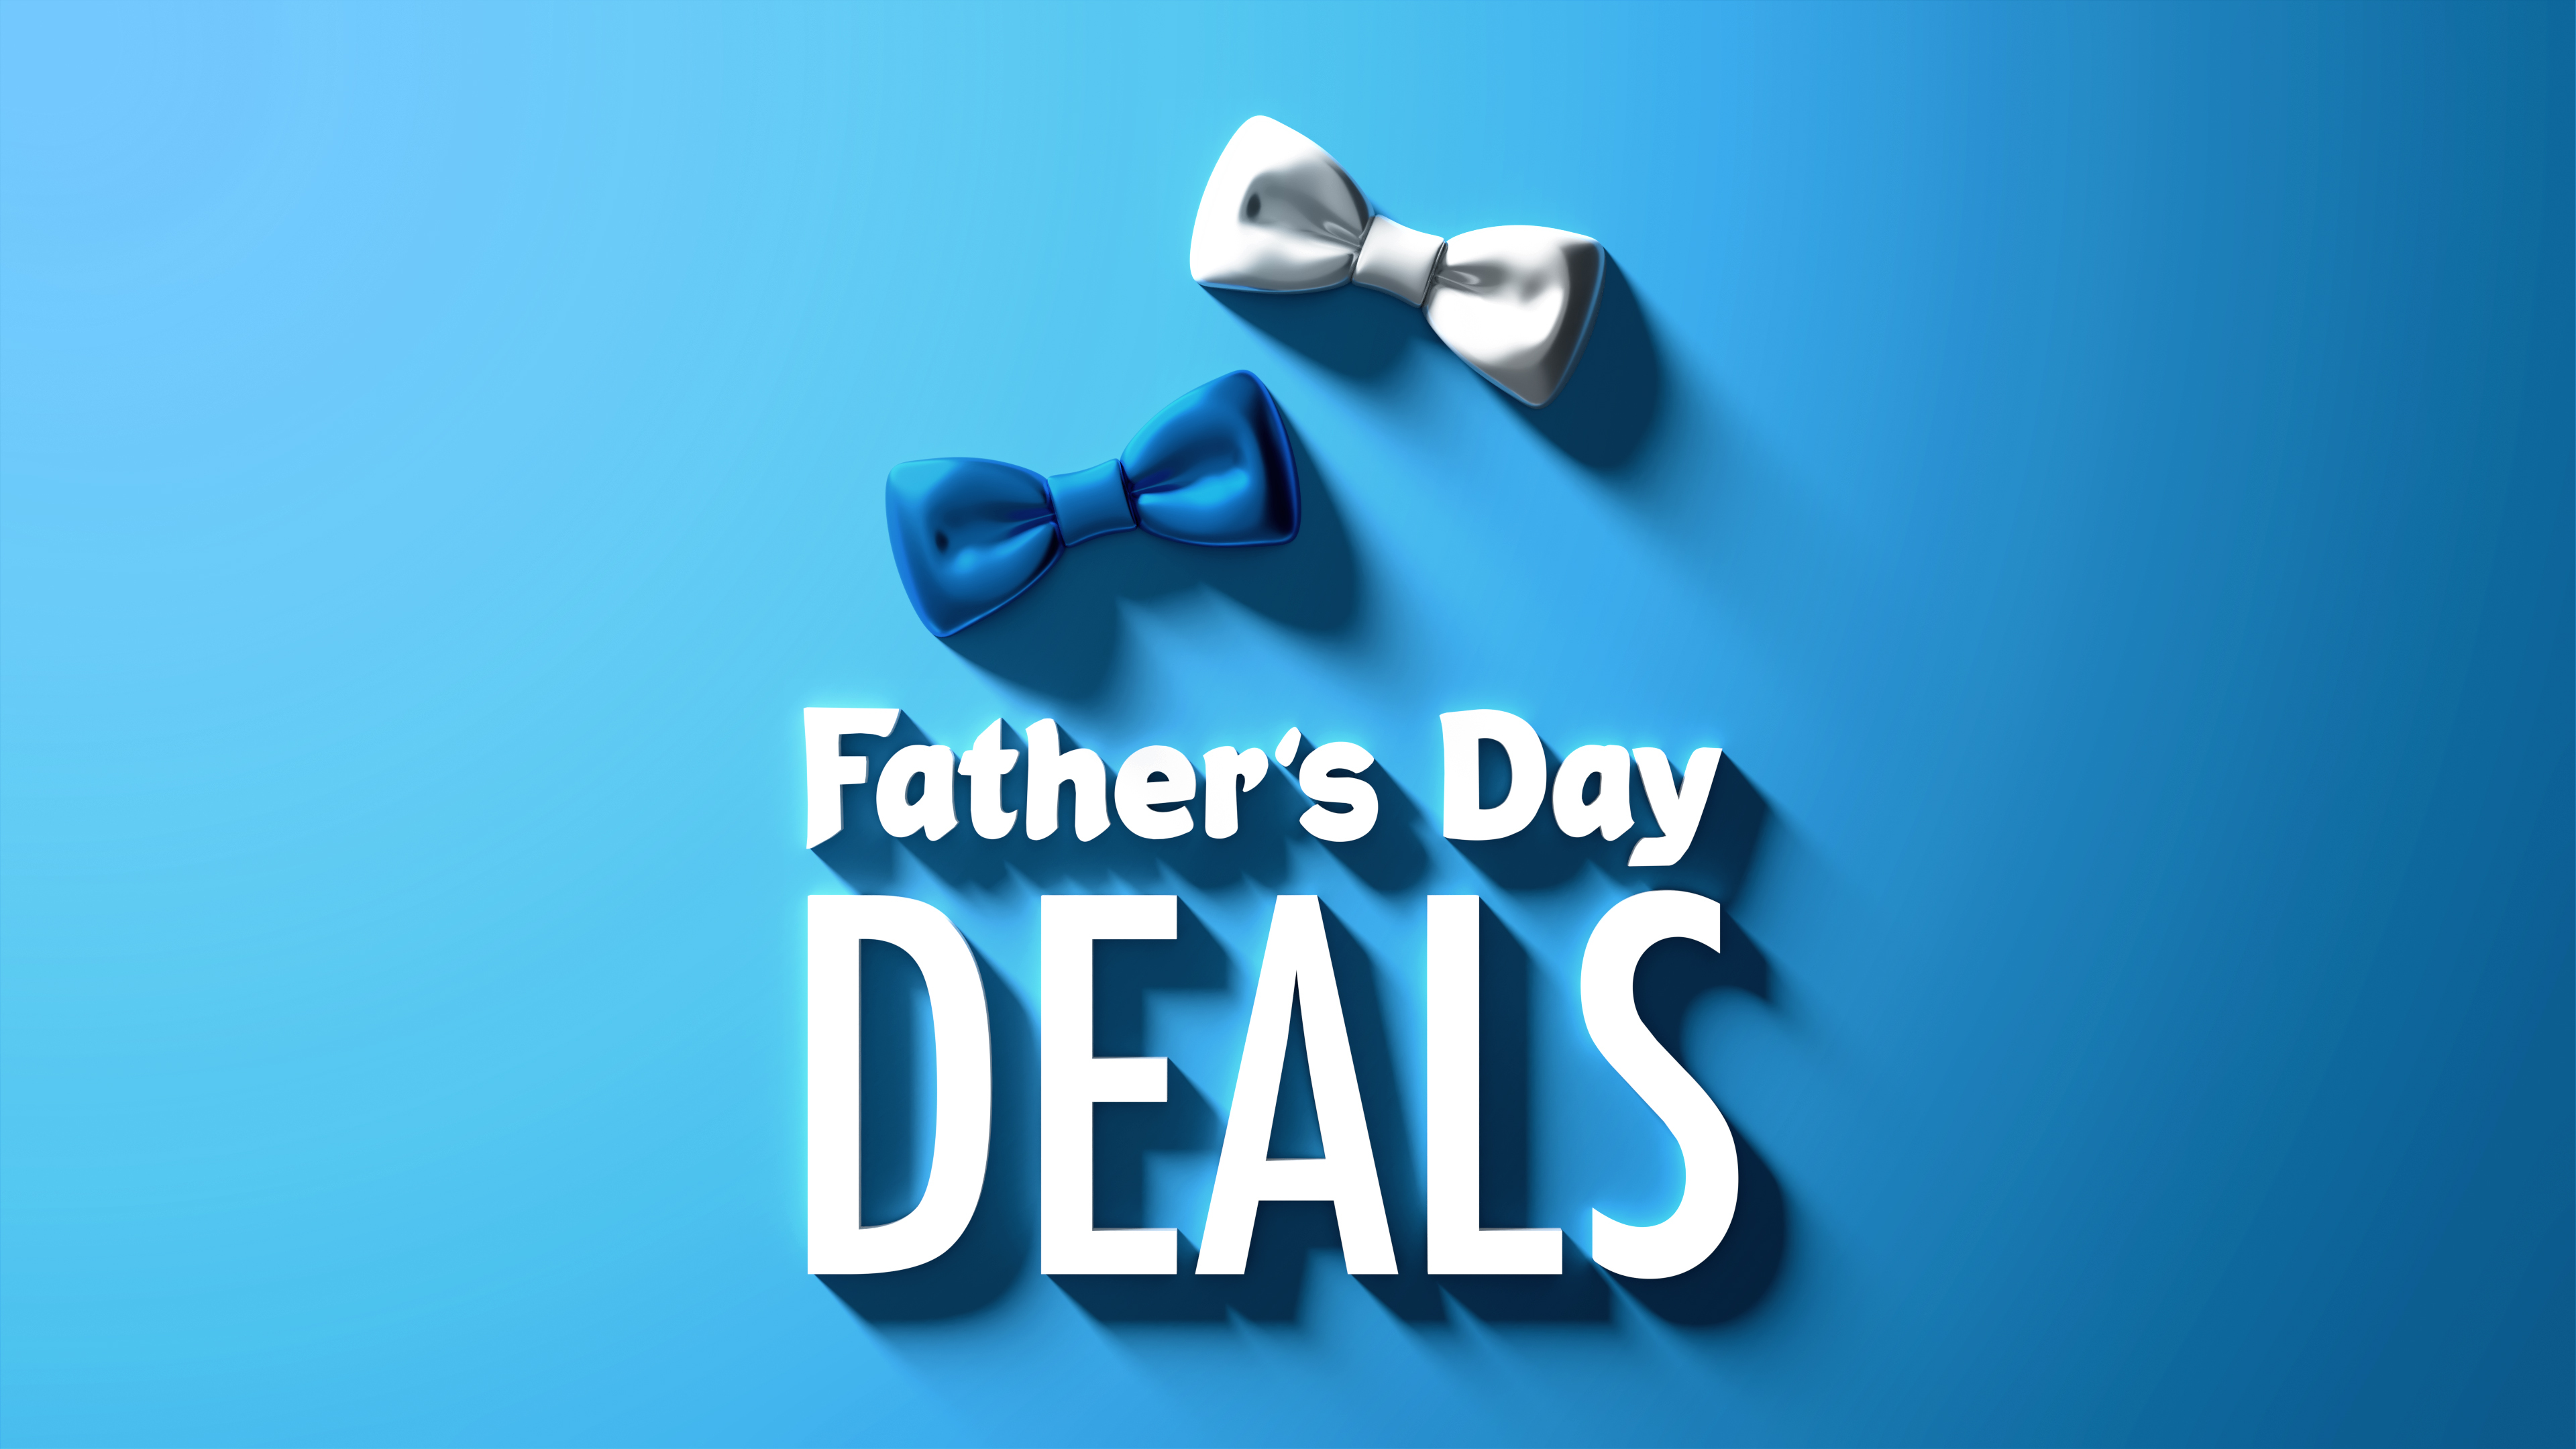 Fathers-Day-Deals-2020.jpg